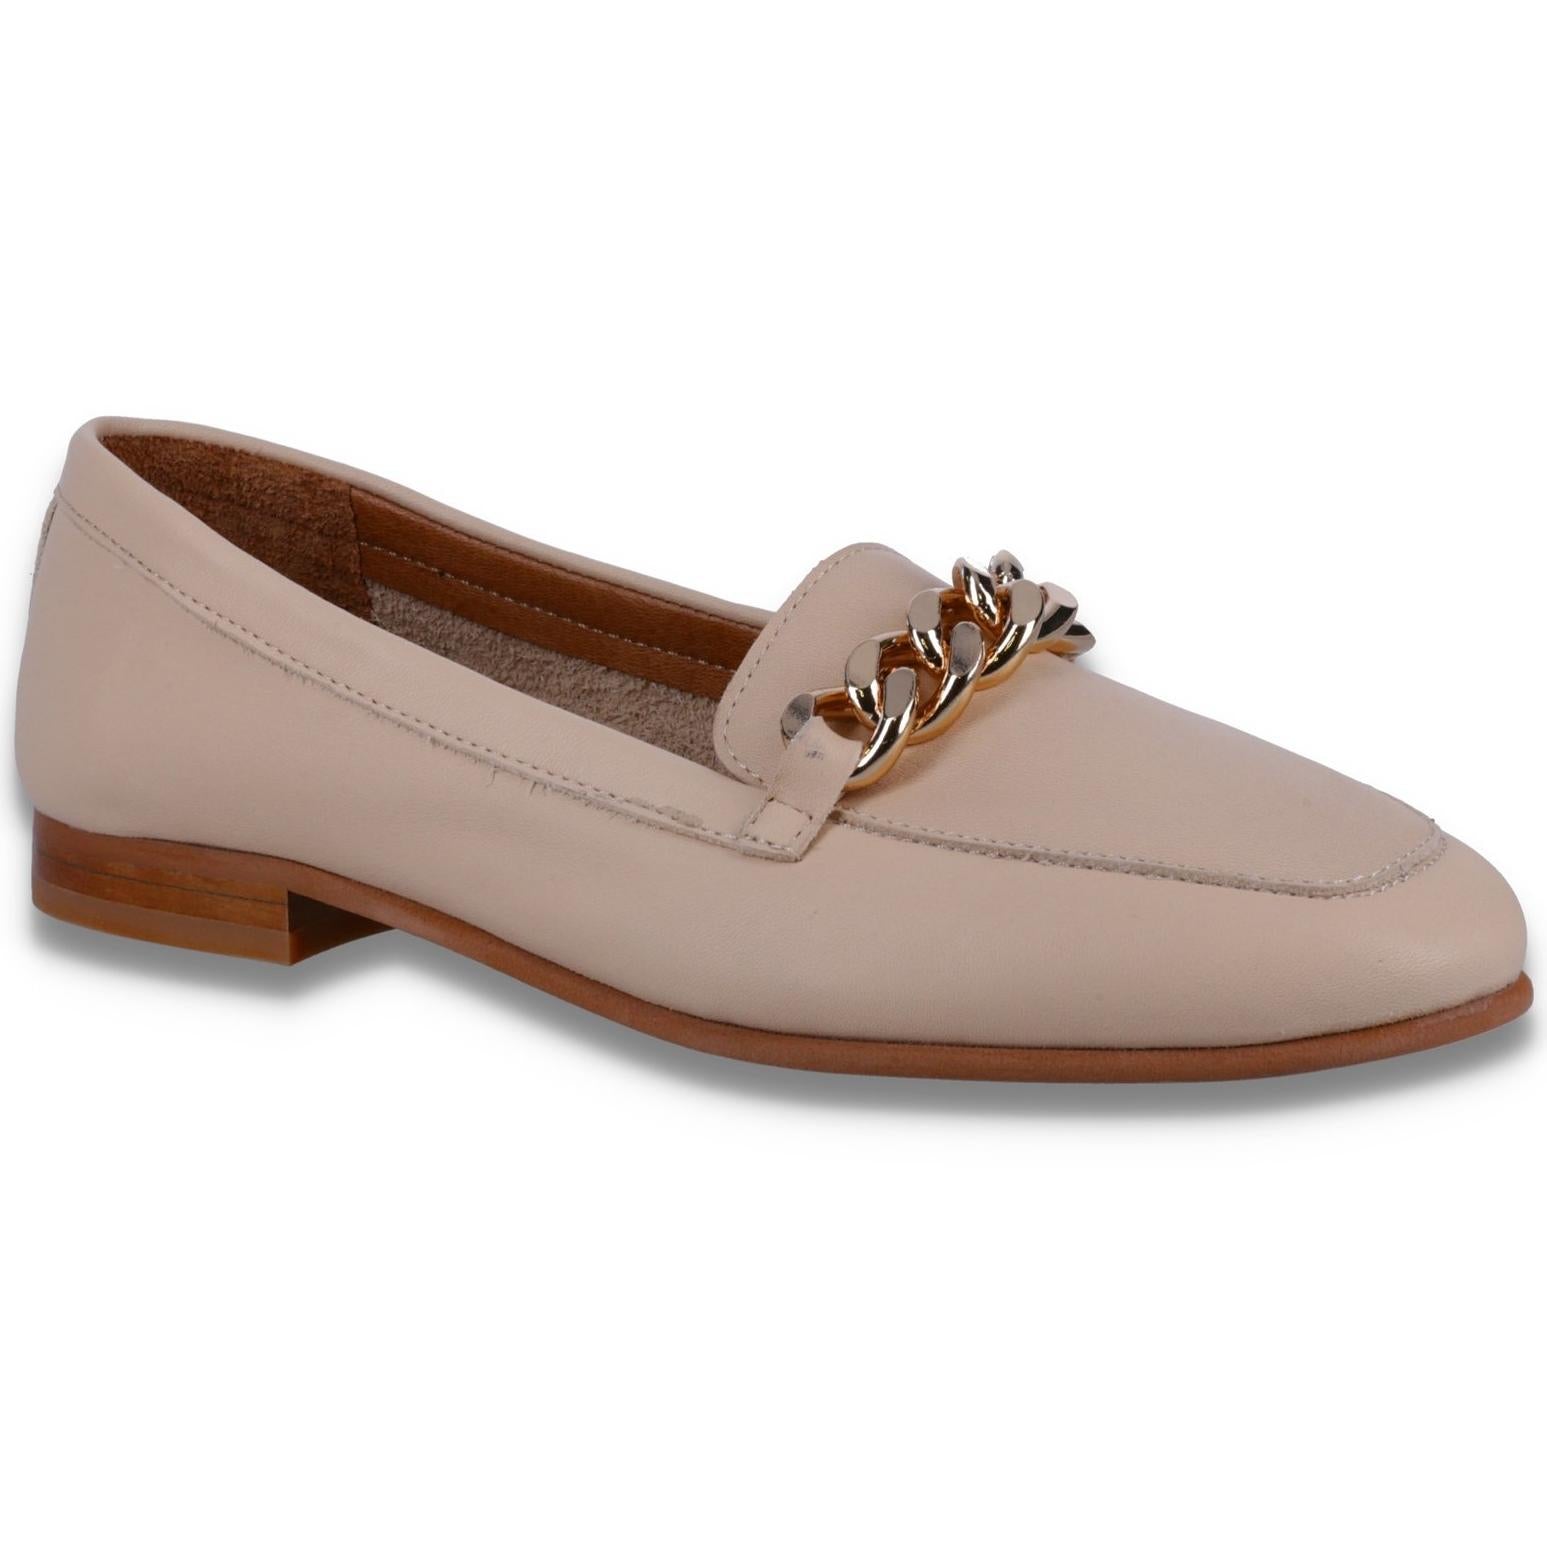 Dune Goldsmith Loafers Flats